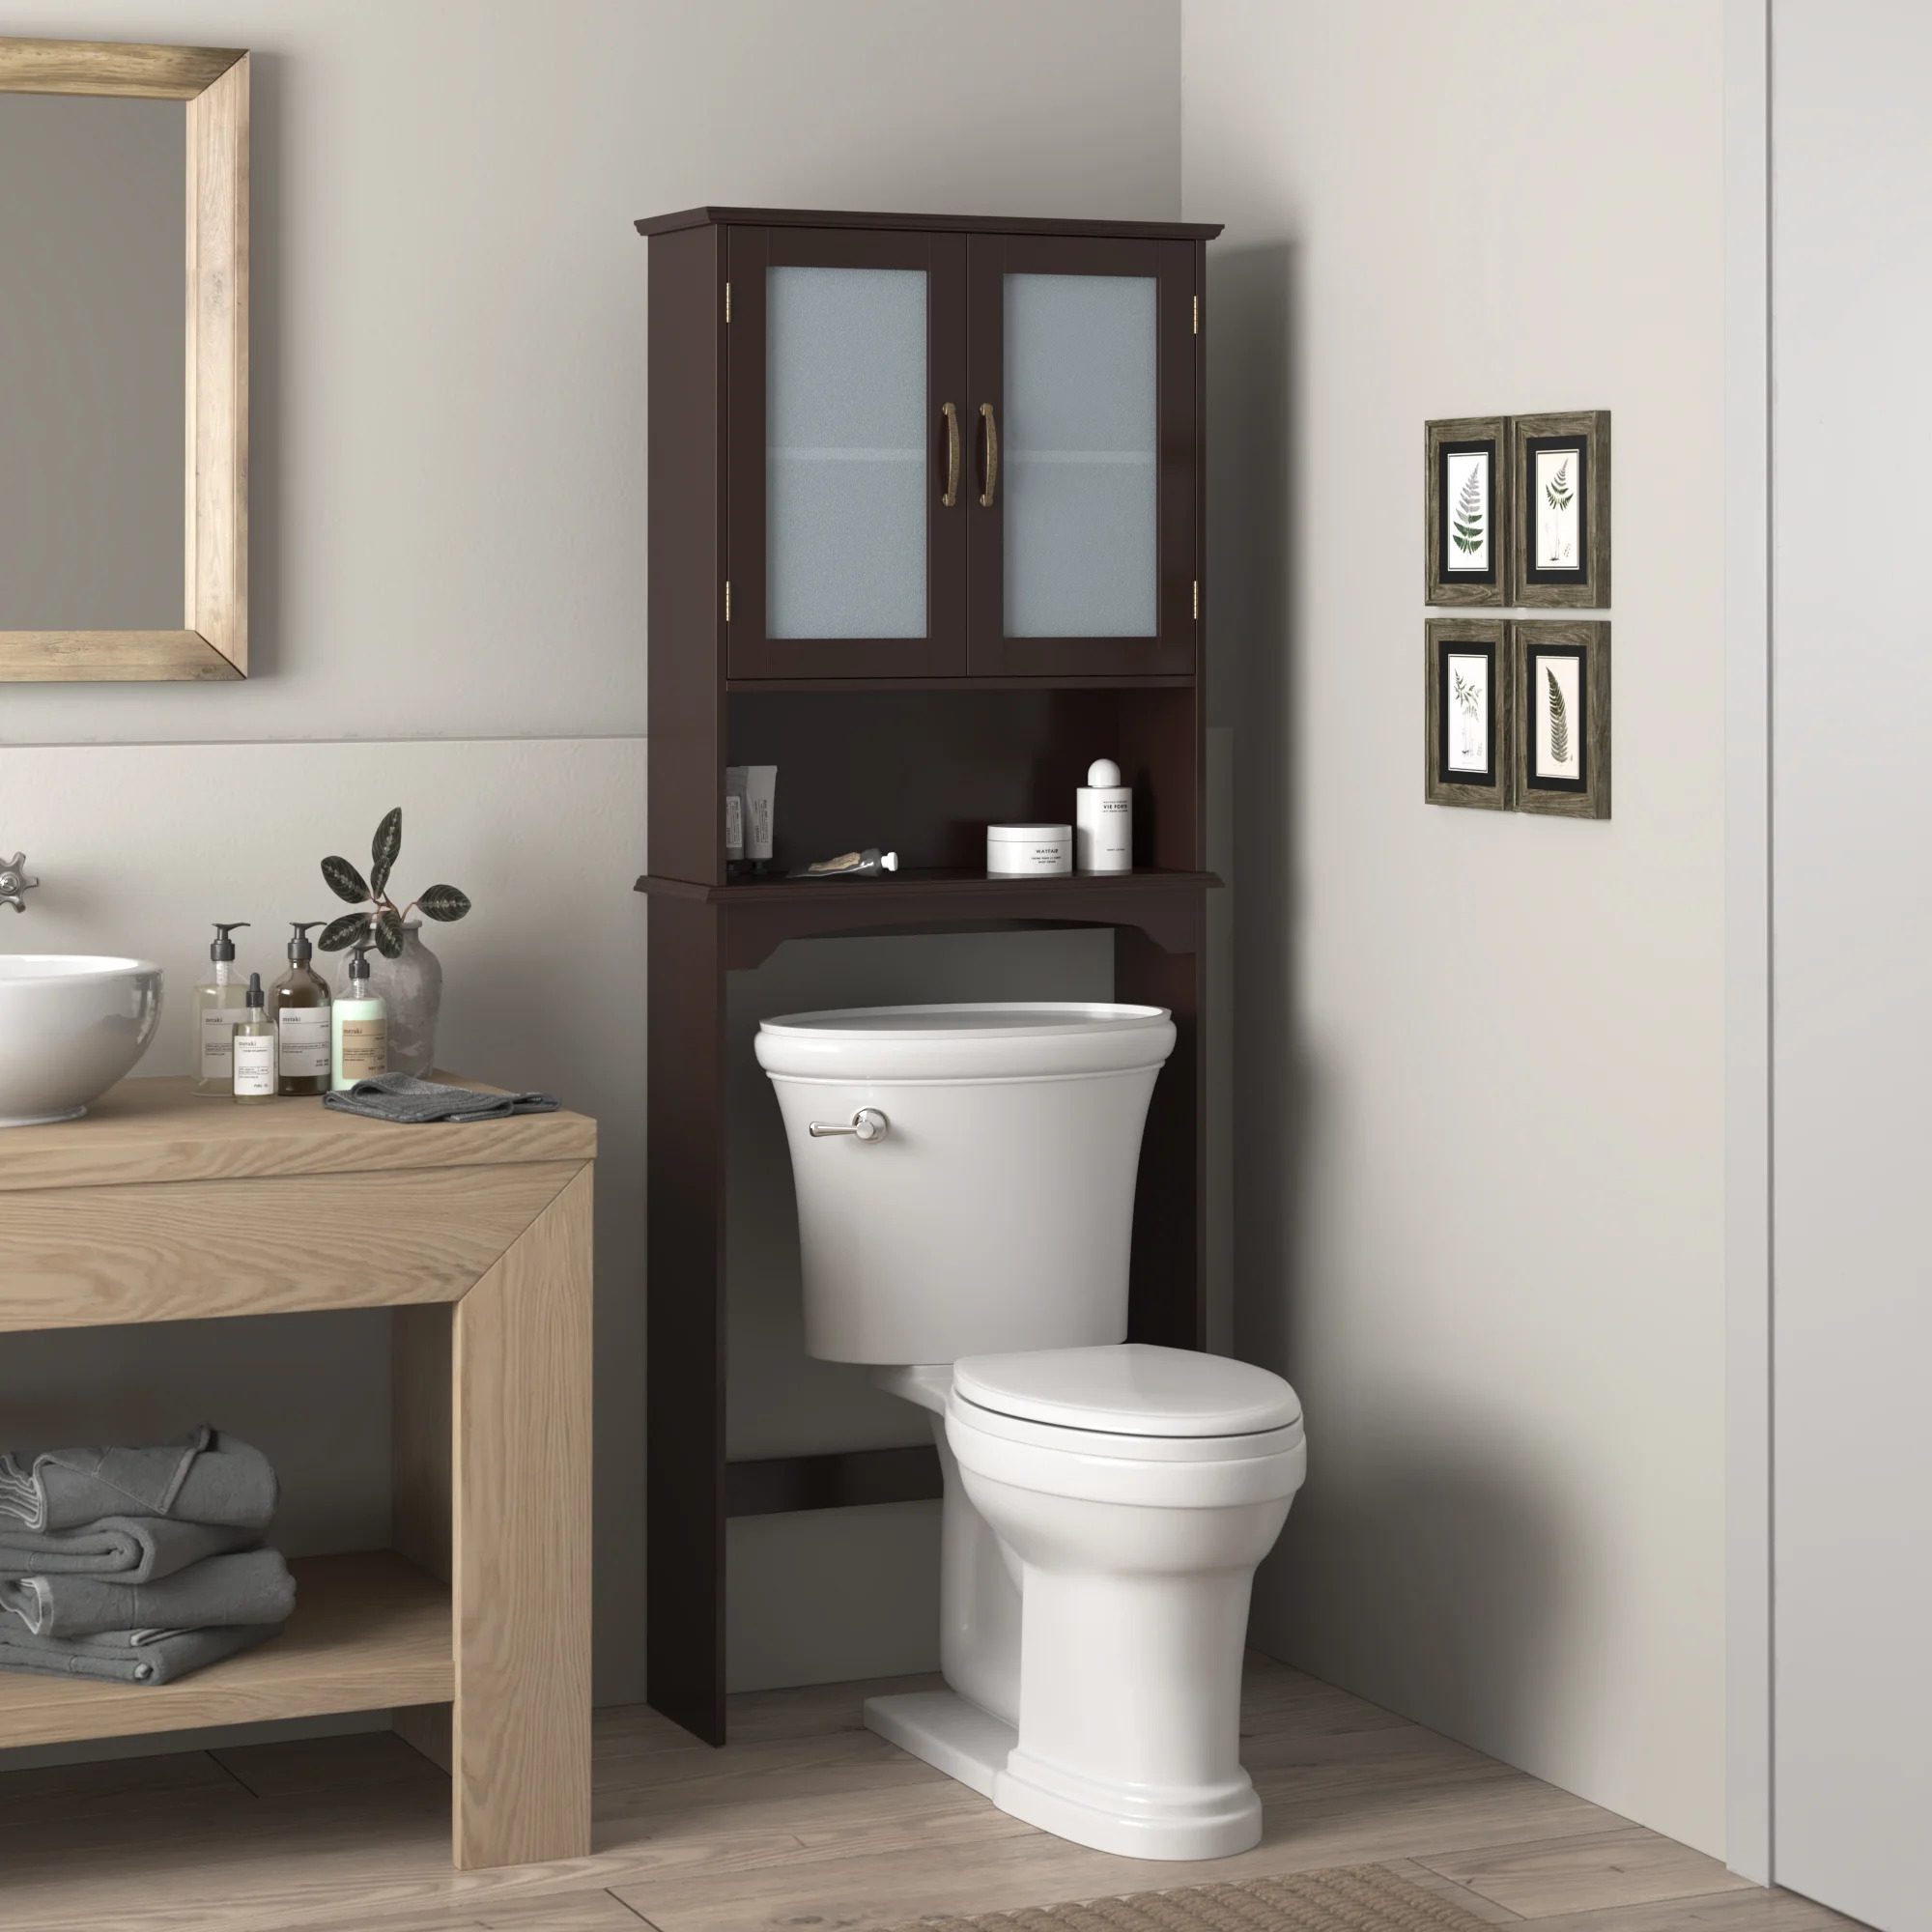 15 Over the Toilet Storage Ideas That Actually Look Amazing